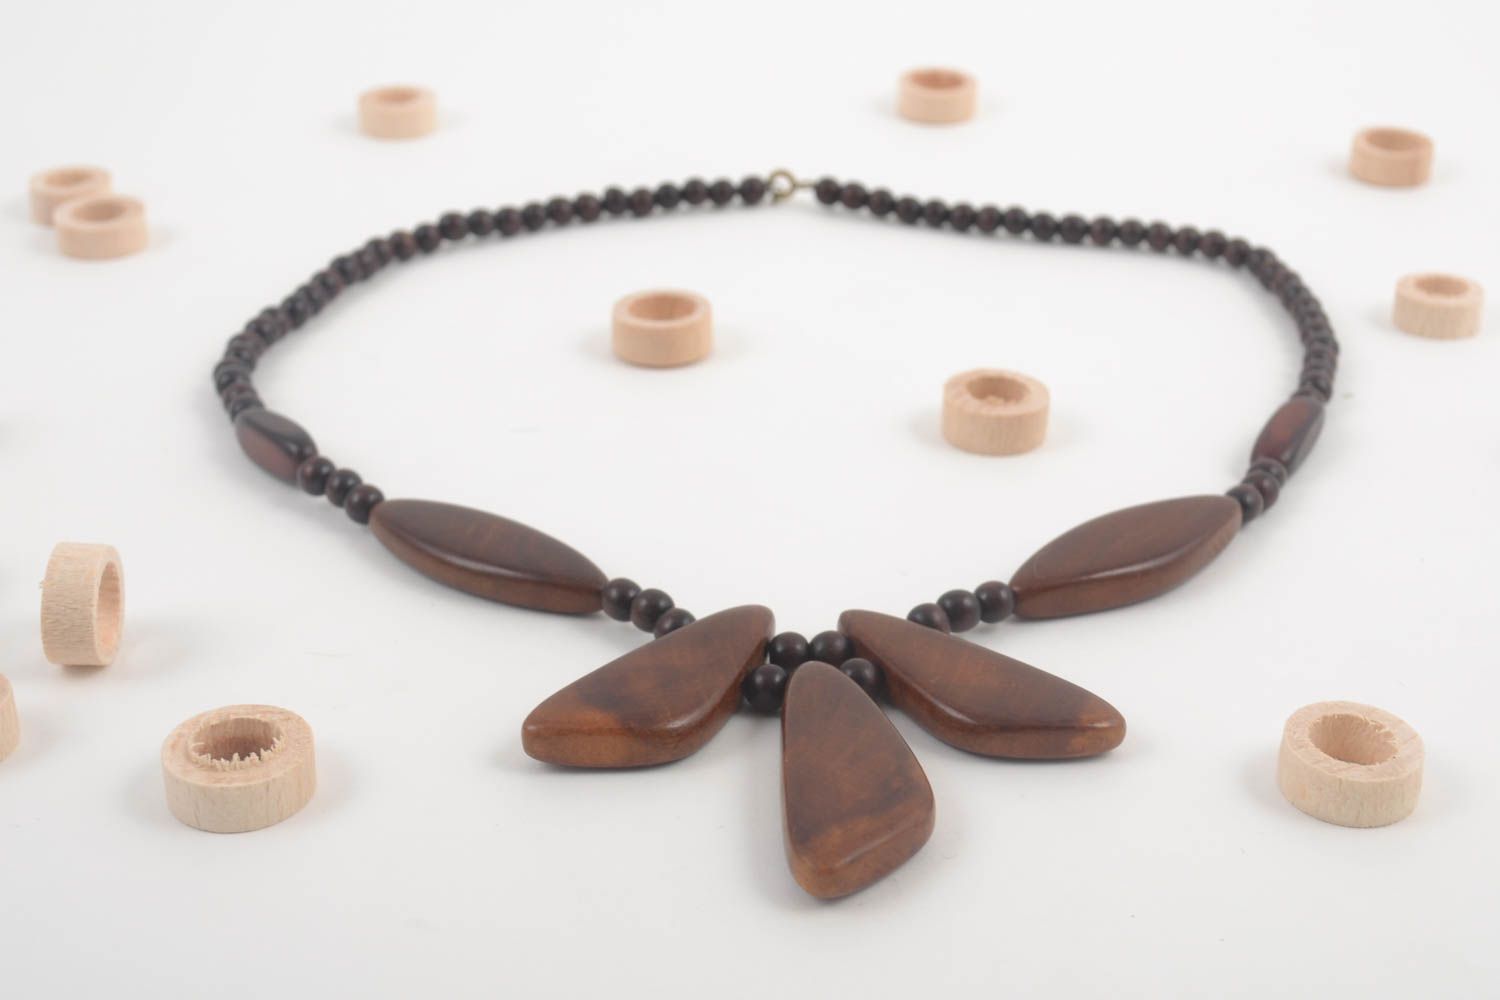 Handmade wooden necklace handmade jewelry wooden accessories for women photo 1